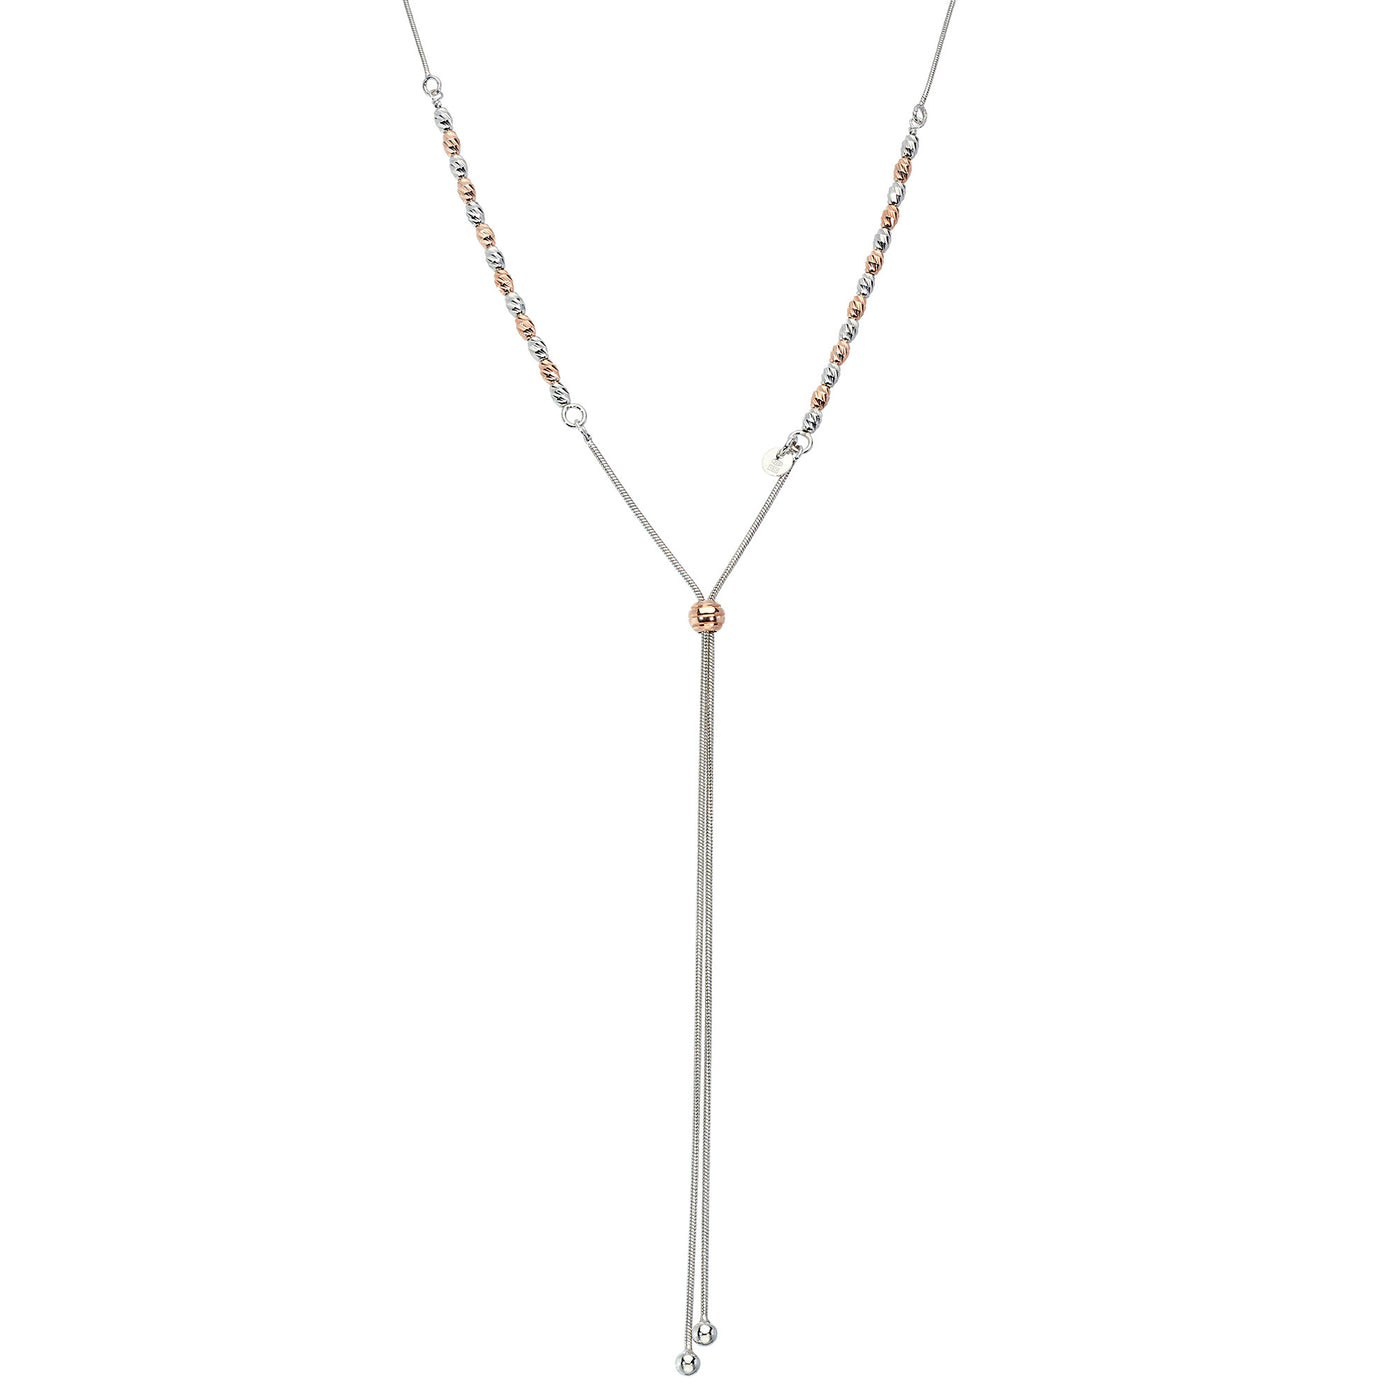 Rebecca Sloane Rose Gold Silver Bead Necklace with Dangles